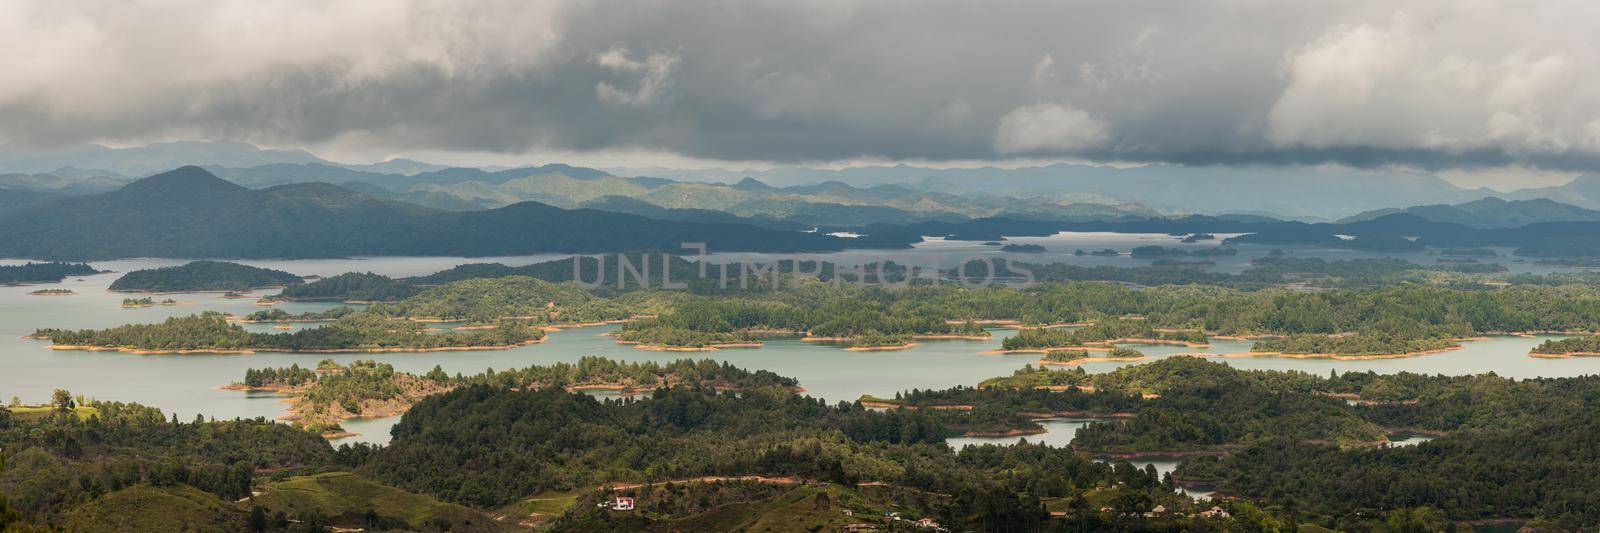 El Penon de Guatape looking out at layers of beautiful land water and terrain. Panoramic view by jyurinko